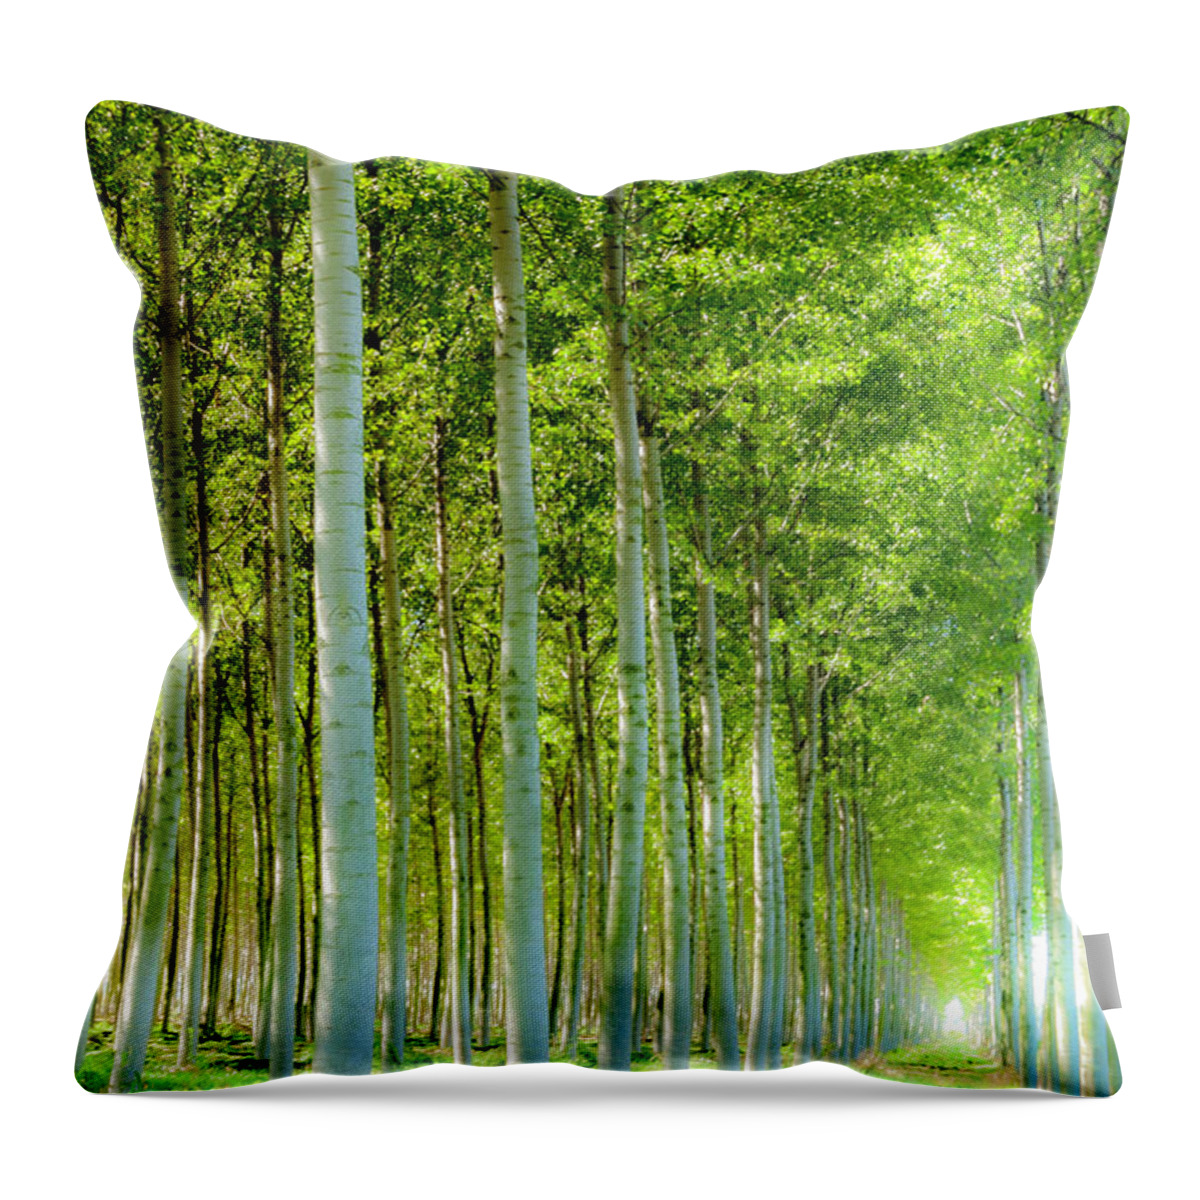 Woods Throw Pillow featuring the photograph In The Woods 4 by Wolfgang Stocker